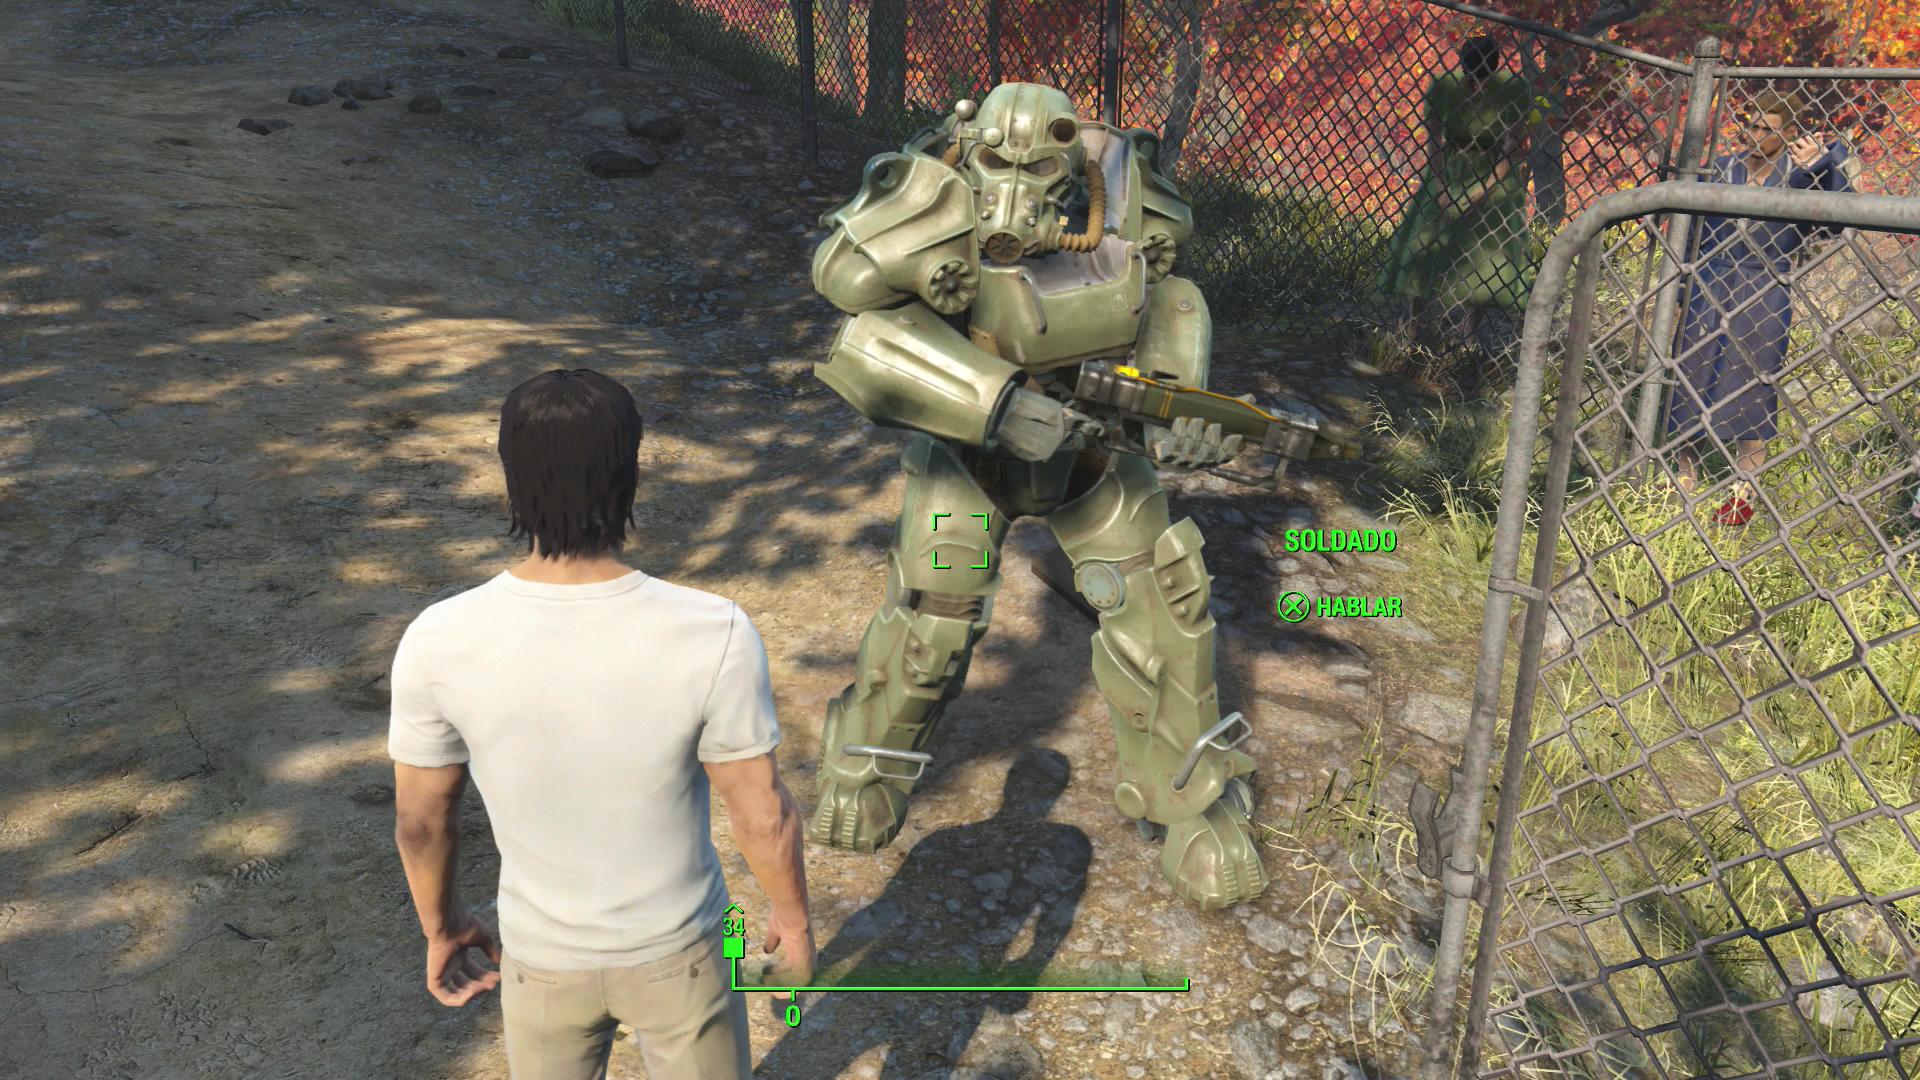 Media asset in full size related to 3dfxzone.it news item entitled as follows: Guarda gli screenshots leaked di Fallout 4 su PlayStation 4 in Full HD | Image Name: news23301_Fallout-4-PS4-Screenshot_4.jpg